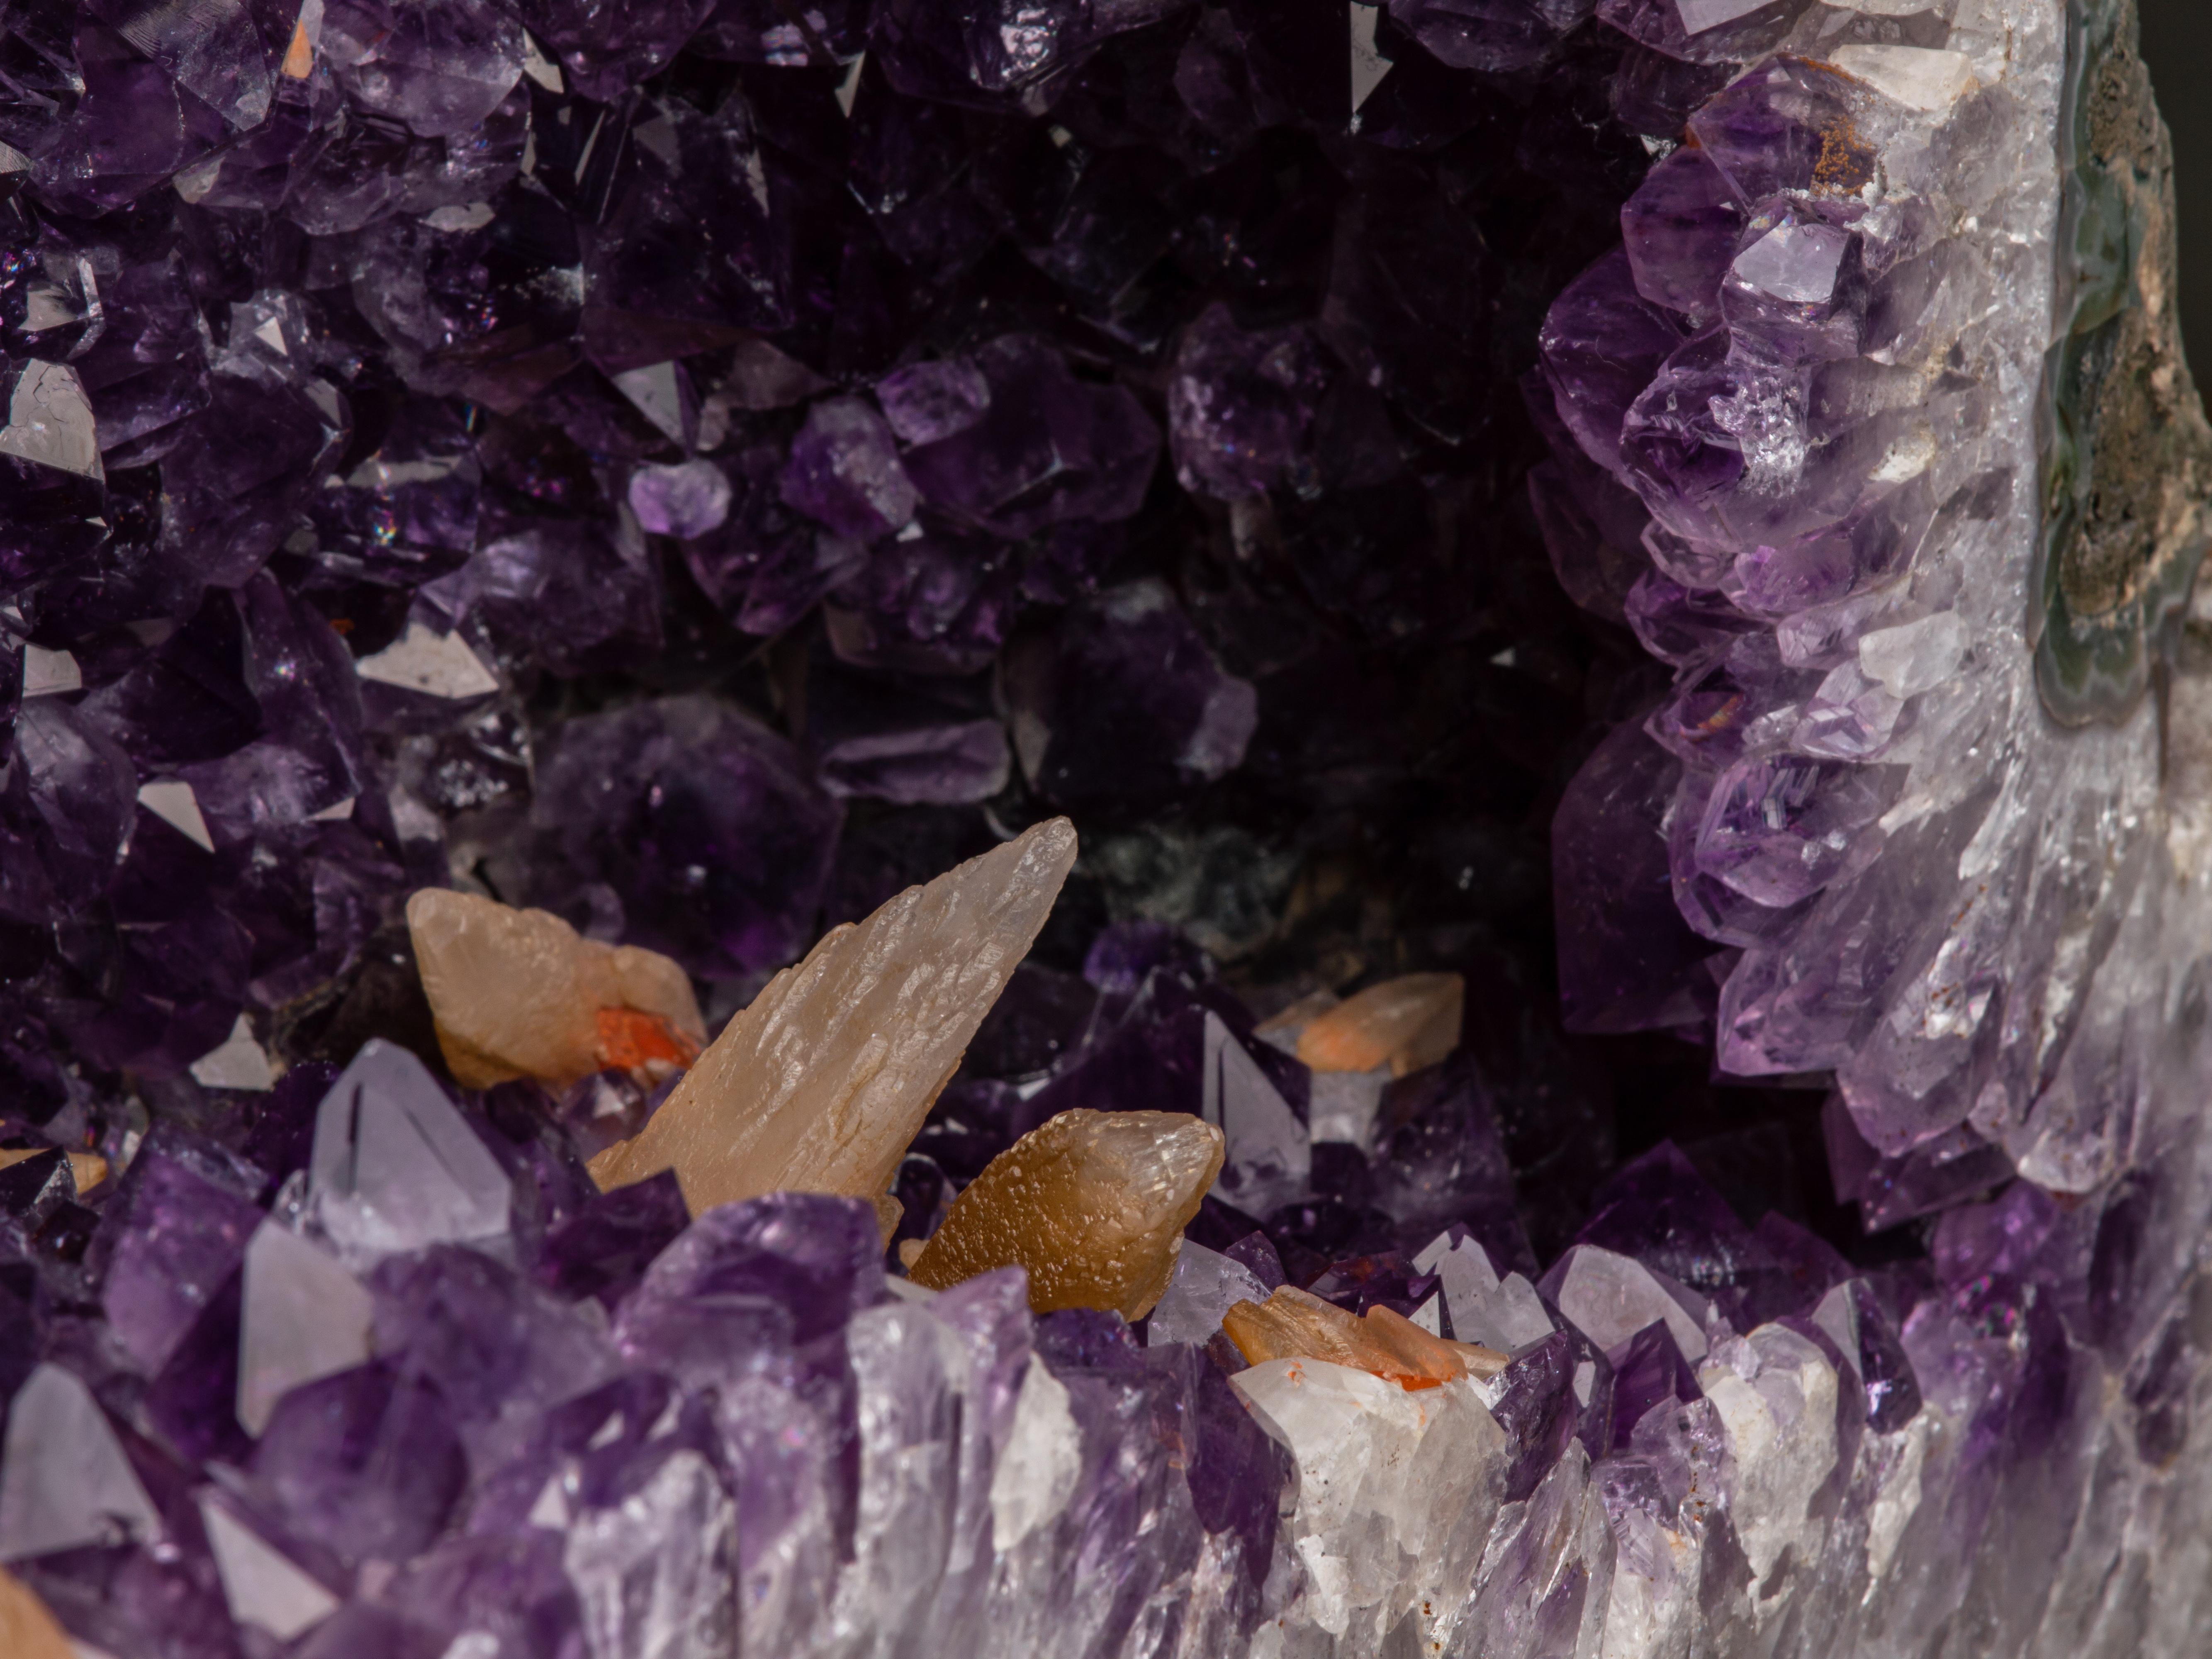 Another large amethyst chapel, the corresponding half of the original geode,
showing deep purple amethyst crystals punctuated with small stalactites
and overlaid in places with tan coloured druzy quartz. The thick
white quartz borders lie inside a